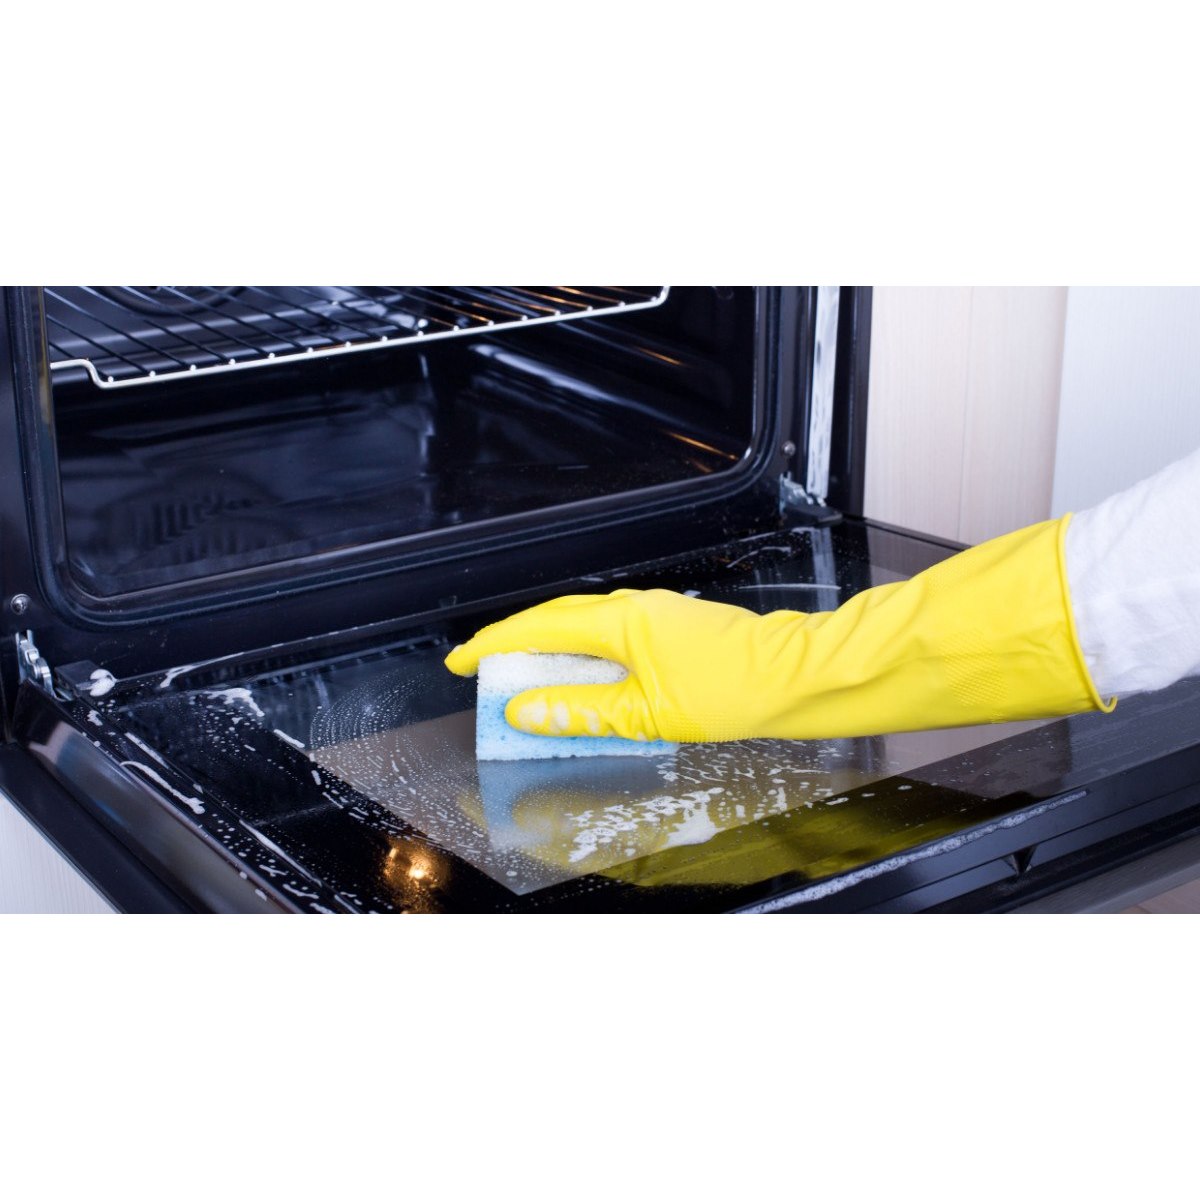 Ecover Oven Cleaner